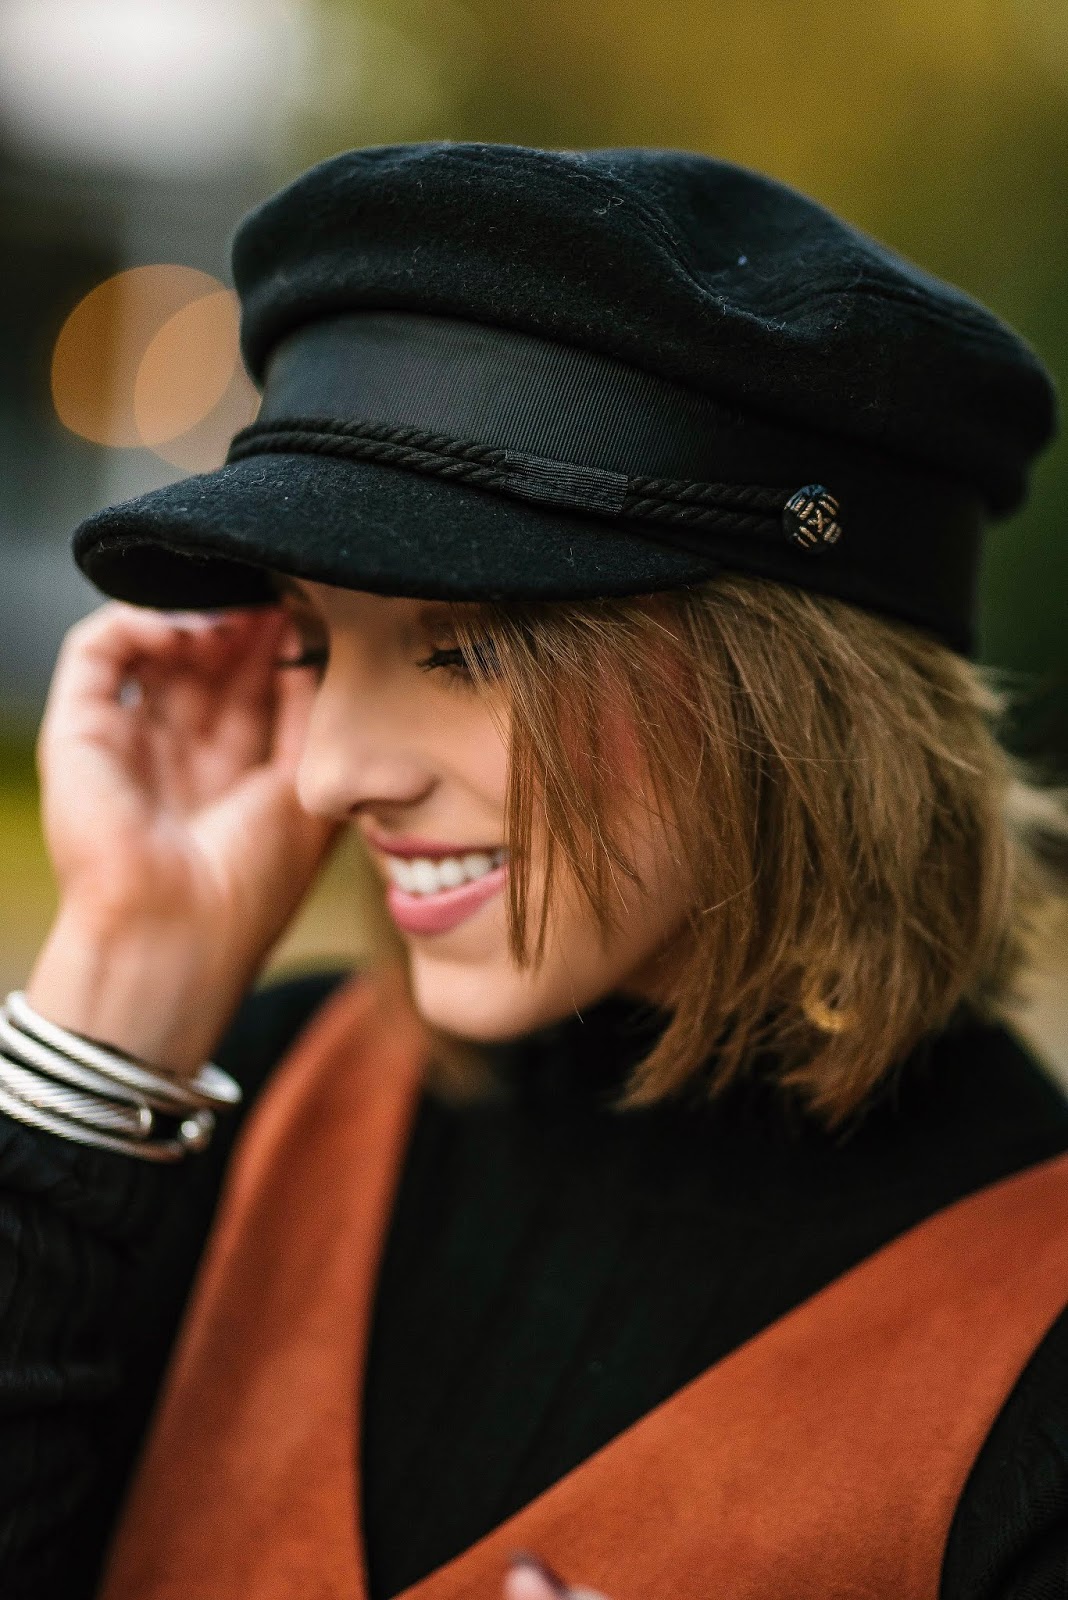 Brown & Black for Fall + How to style a Baker Boy Hat - Something Delightful Blog